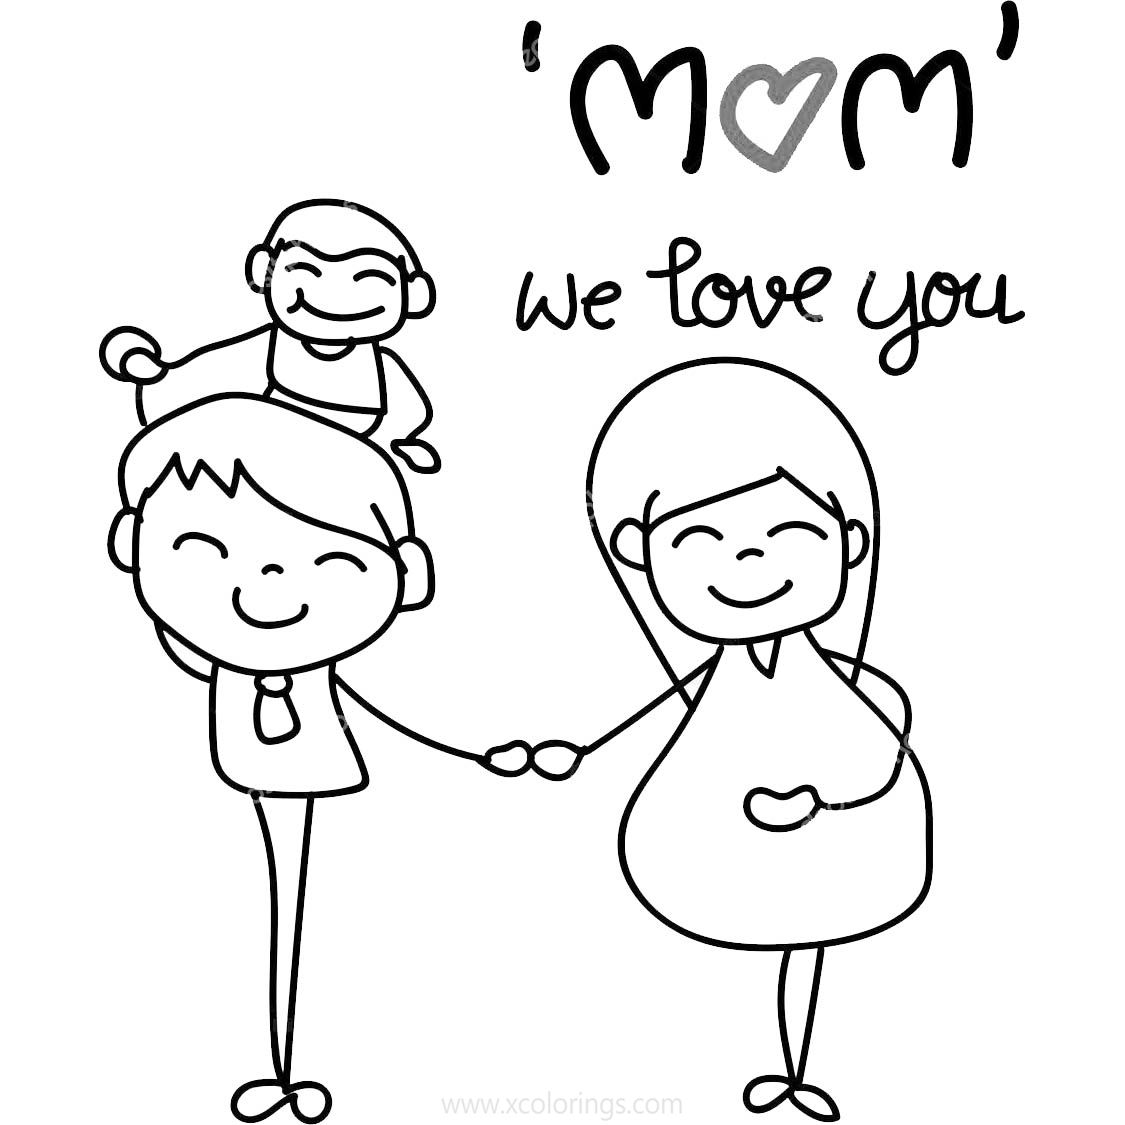 Free Mother's Day Coloring Pages Mom We Love You printable